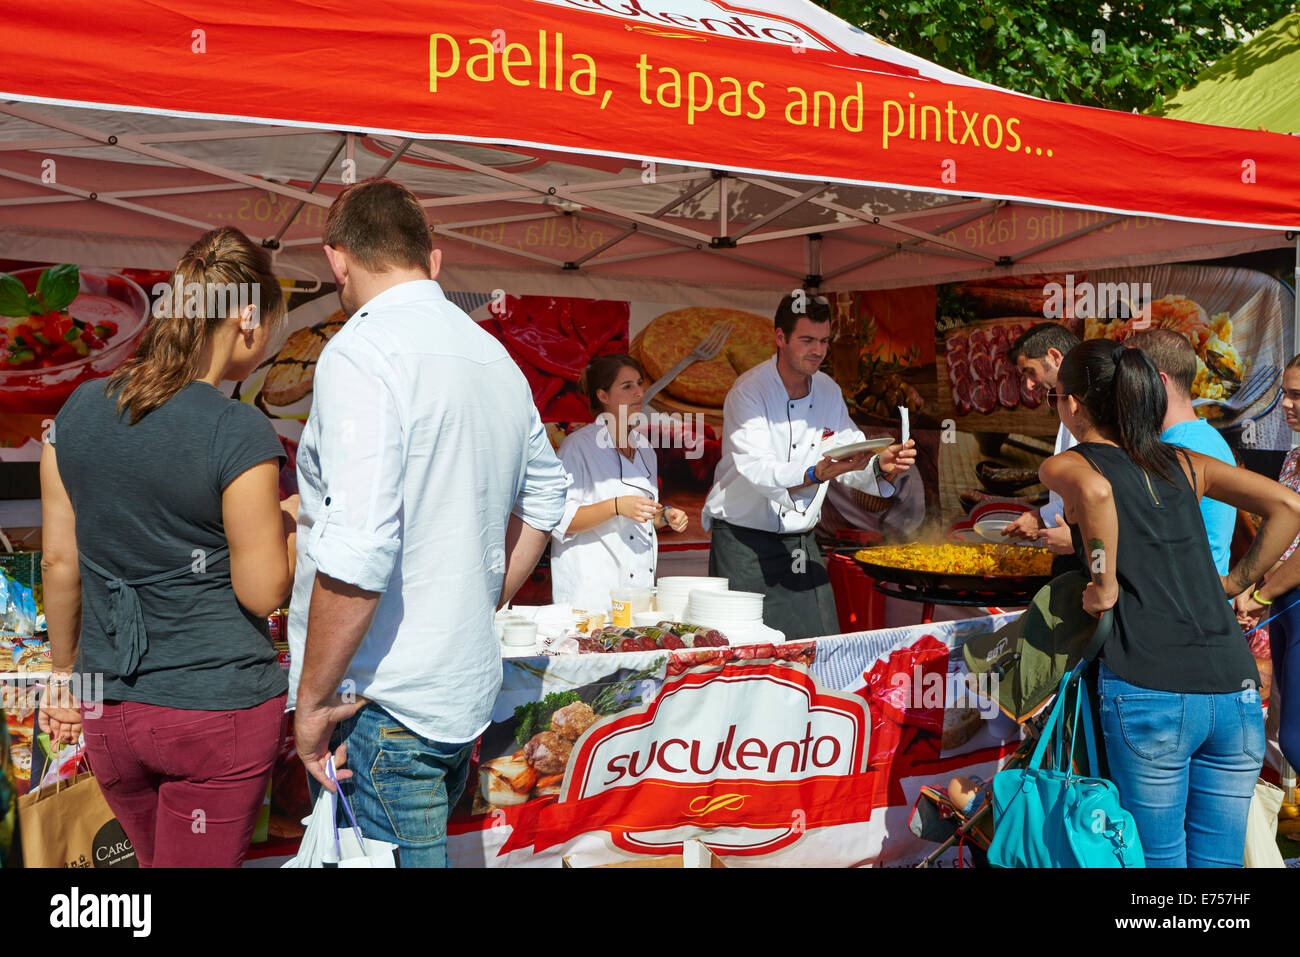 Stall Selling Paella Tapas And Pintxos At The Food And Drink Festival Leamington Spa Warwickshire UK Stock Photo